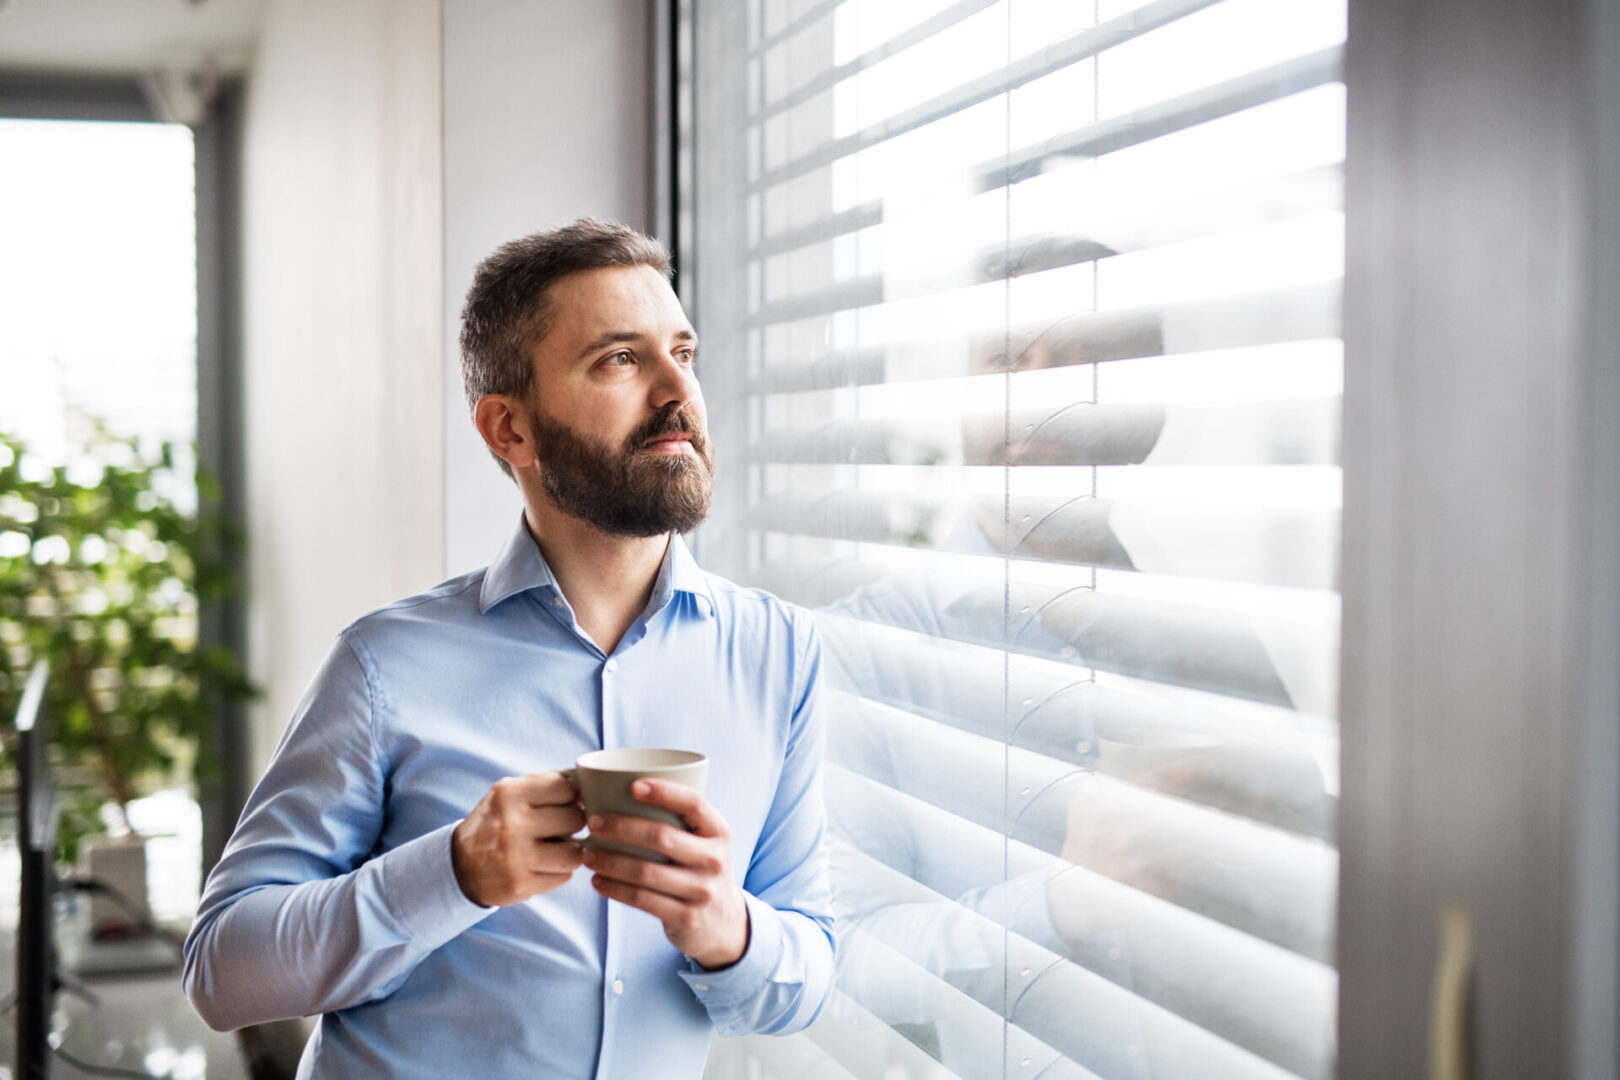 A man standing by the window, holding a cup of coffee. Smart home control system.